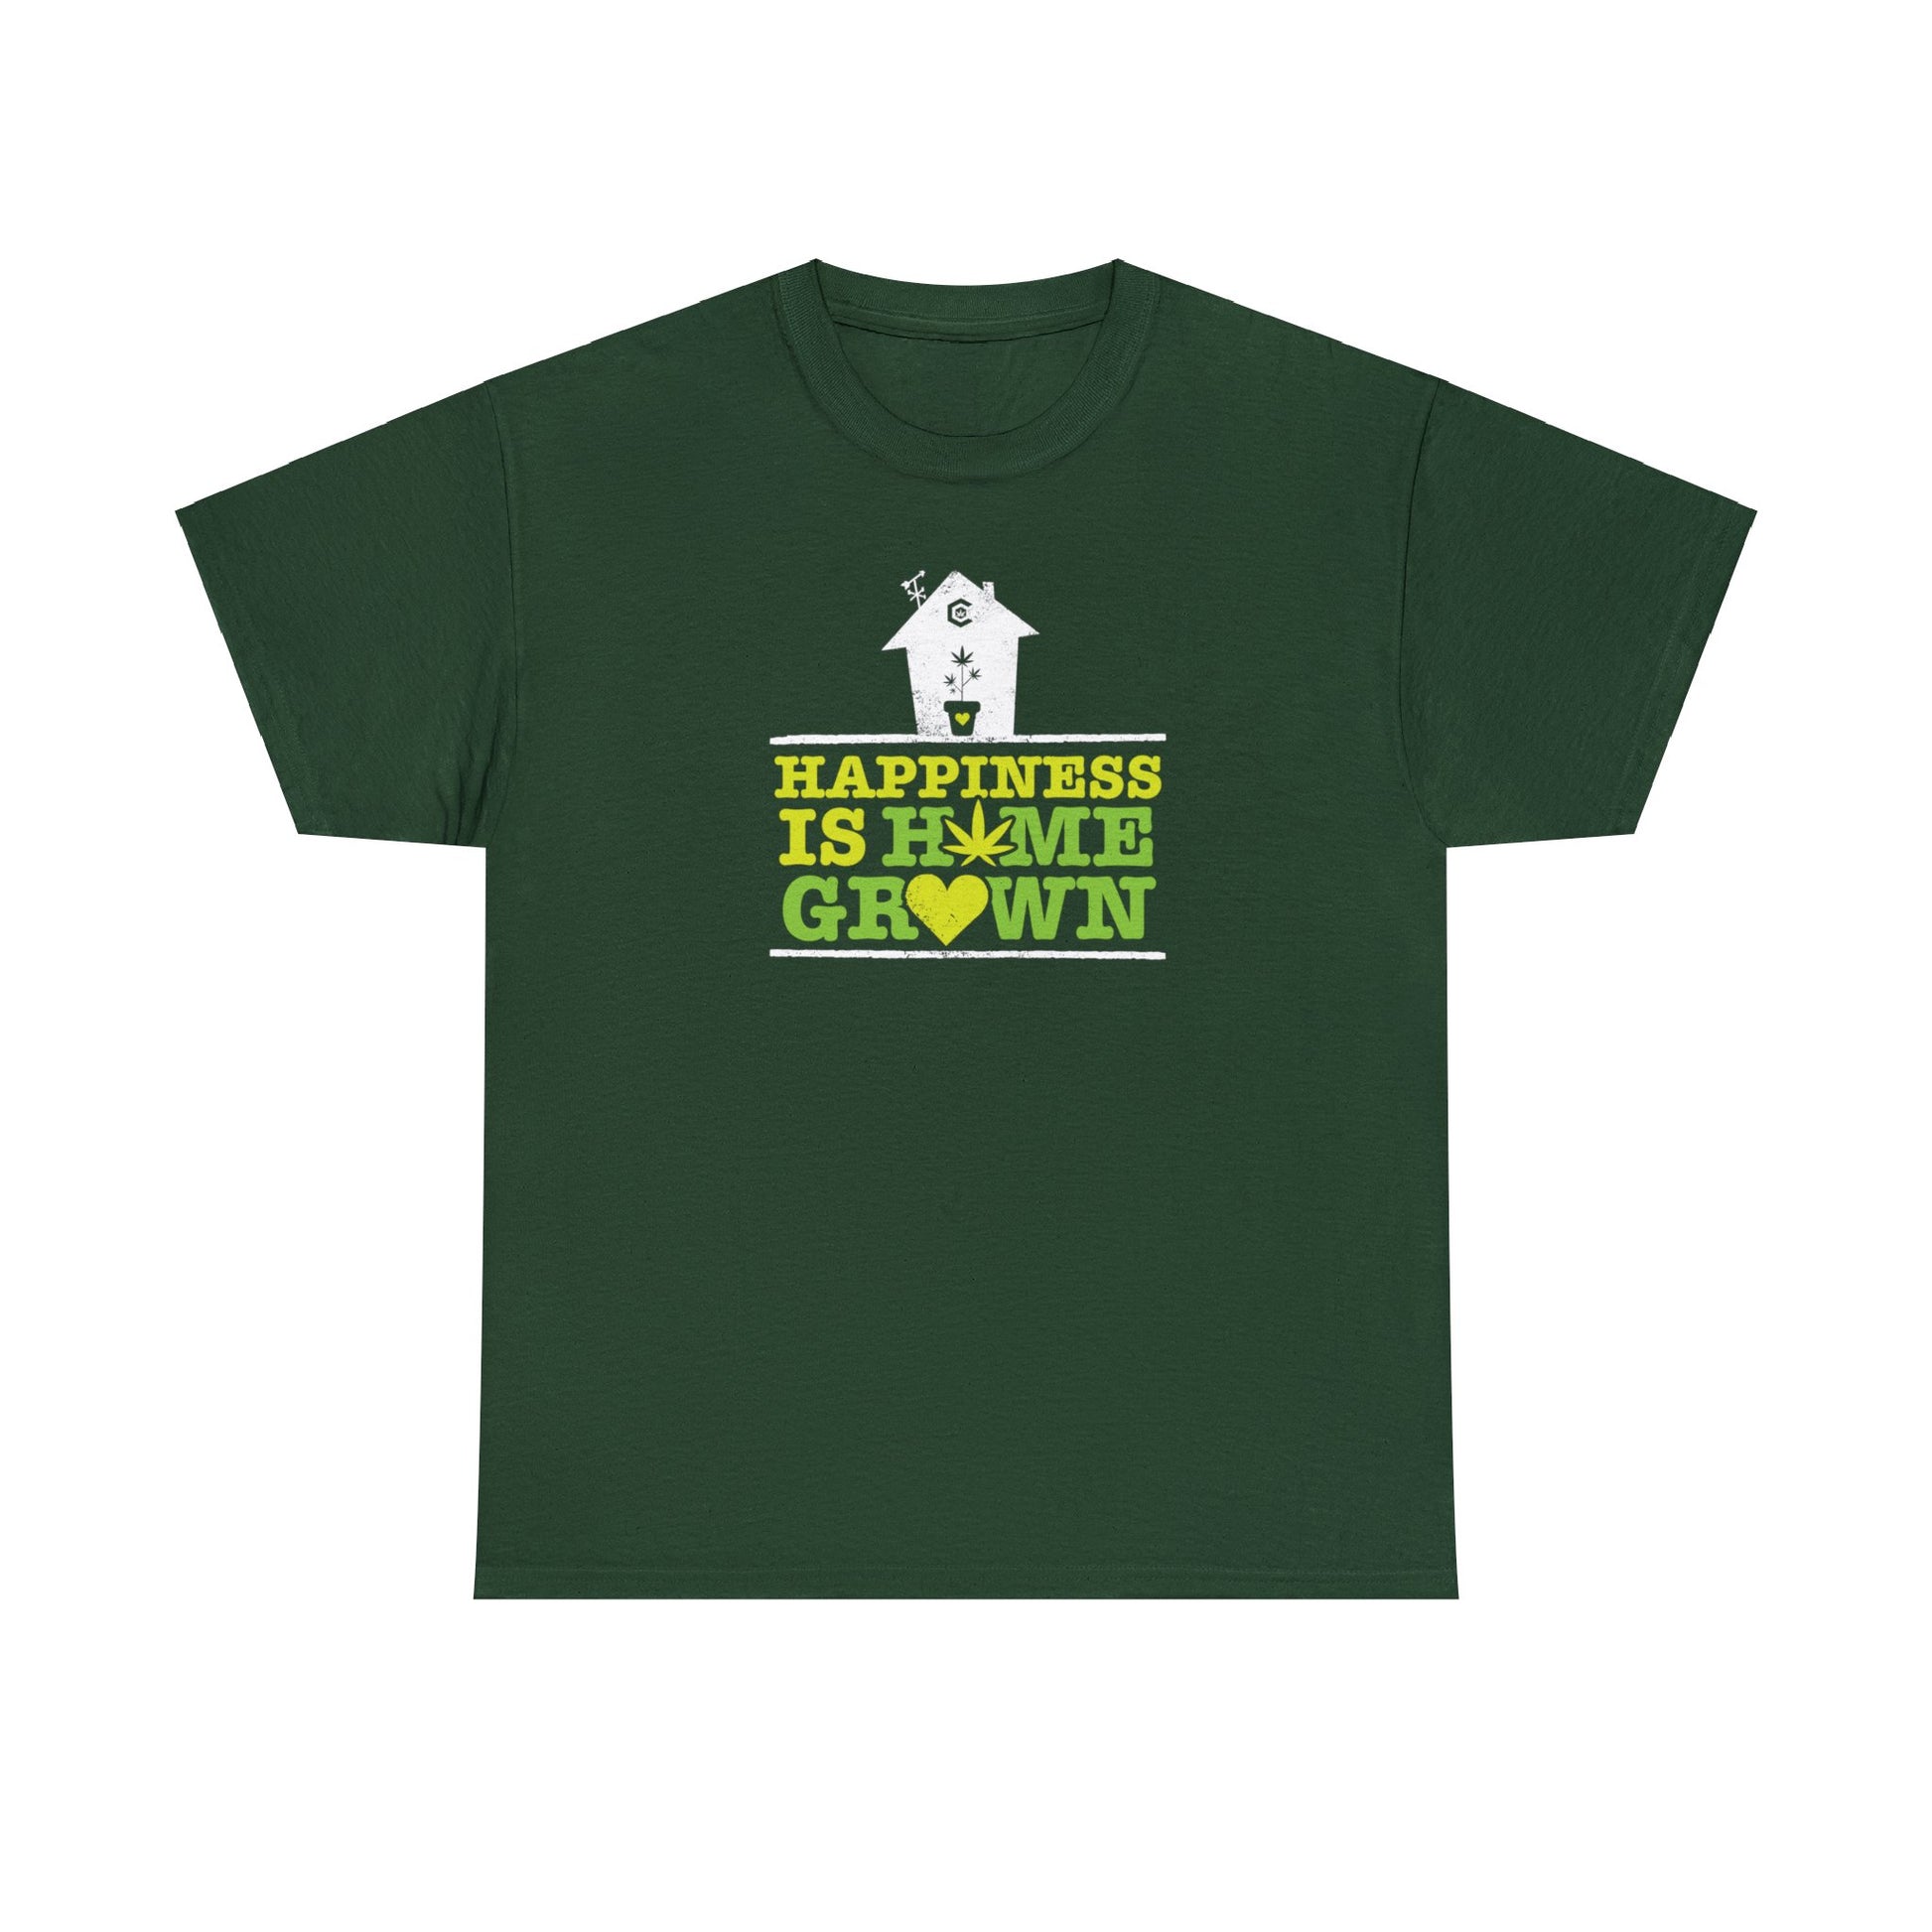 A Happiness Is Homegrown Pot Shirt featuring a yellow and green house design.